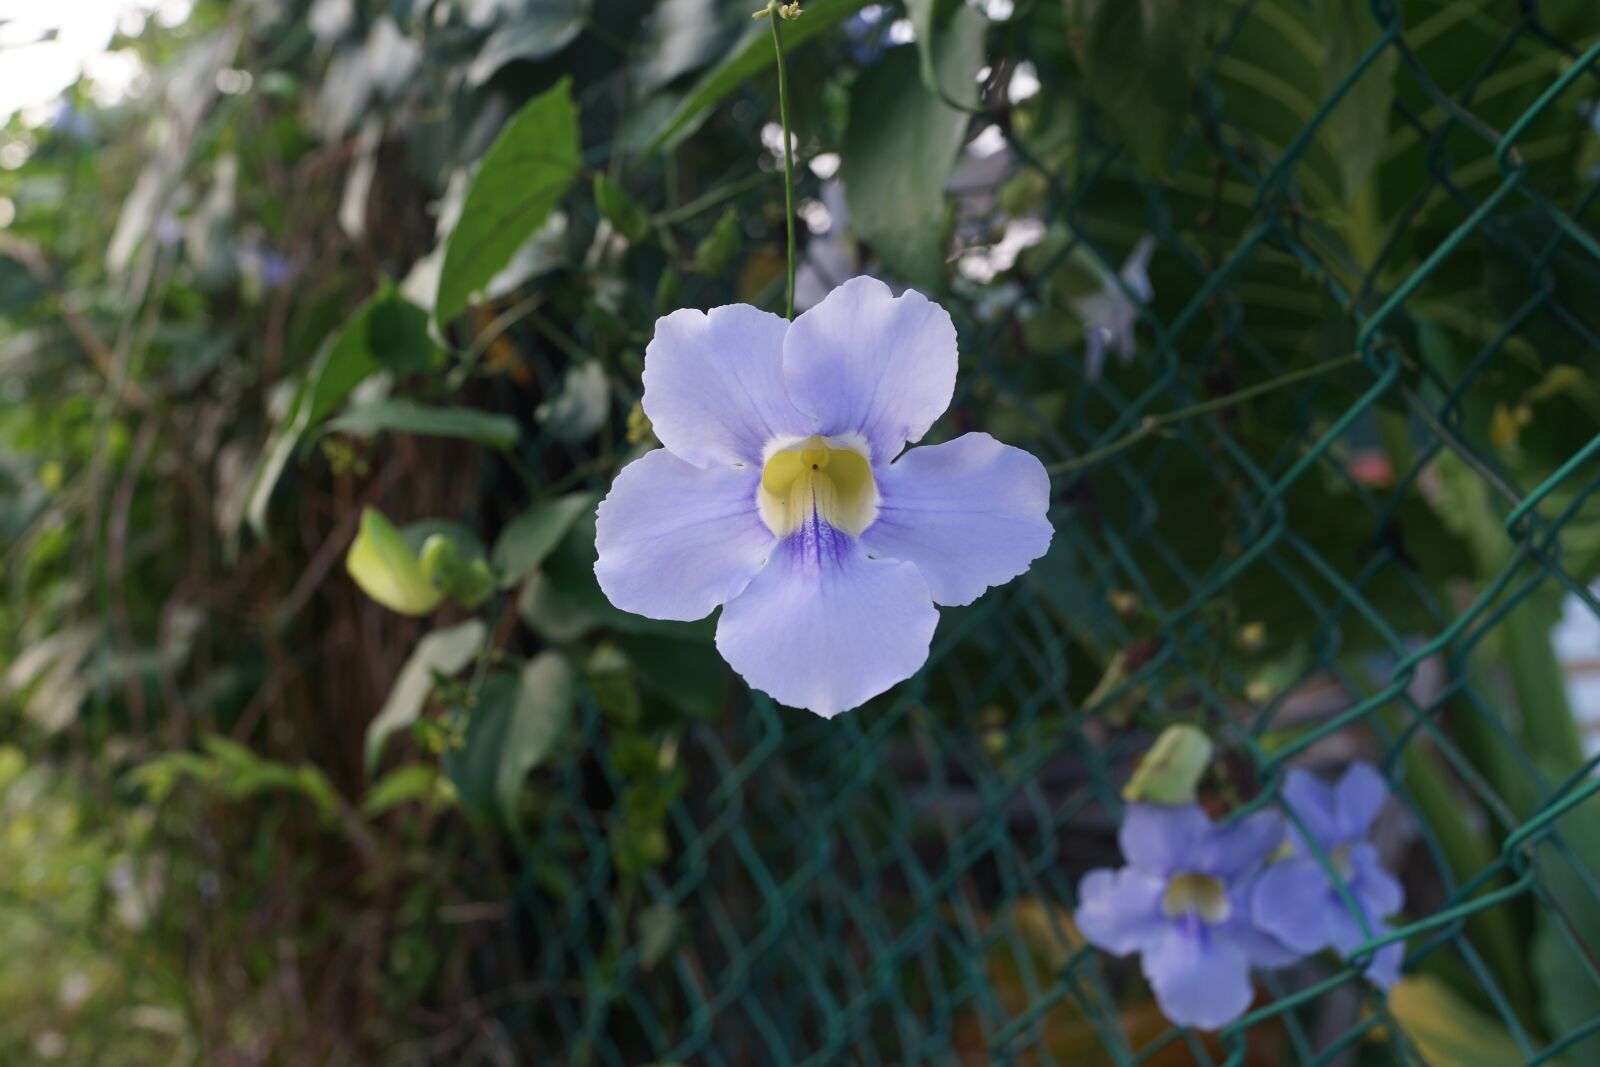 Sony Cyber-shot DSC-RX1R sample photo. Morning glory, nature, floral photography